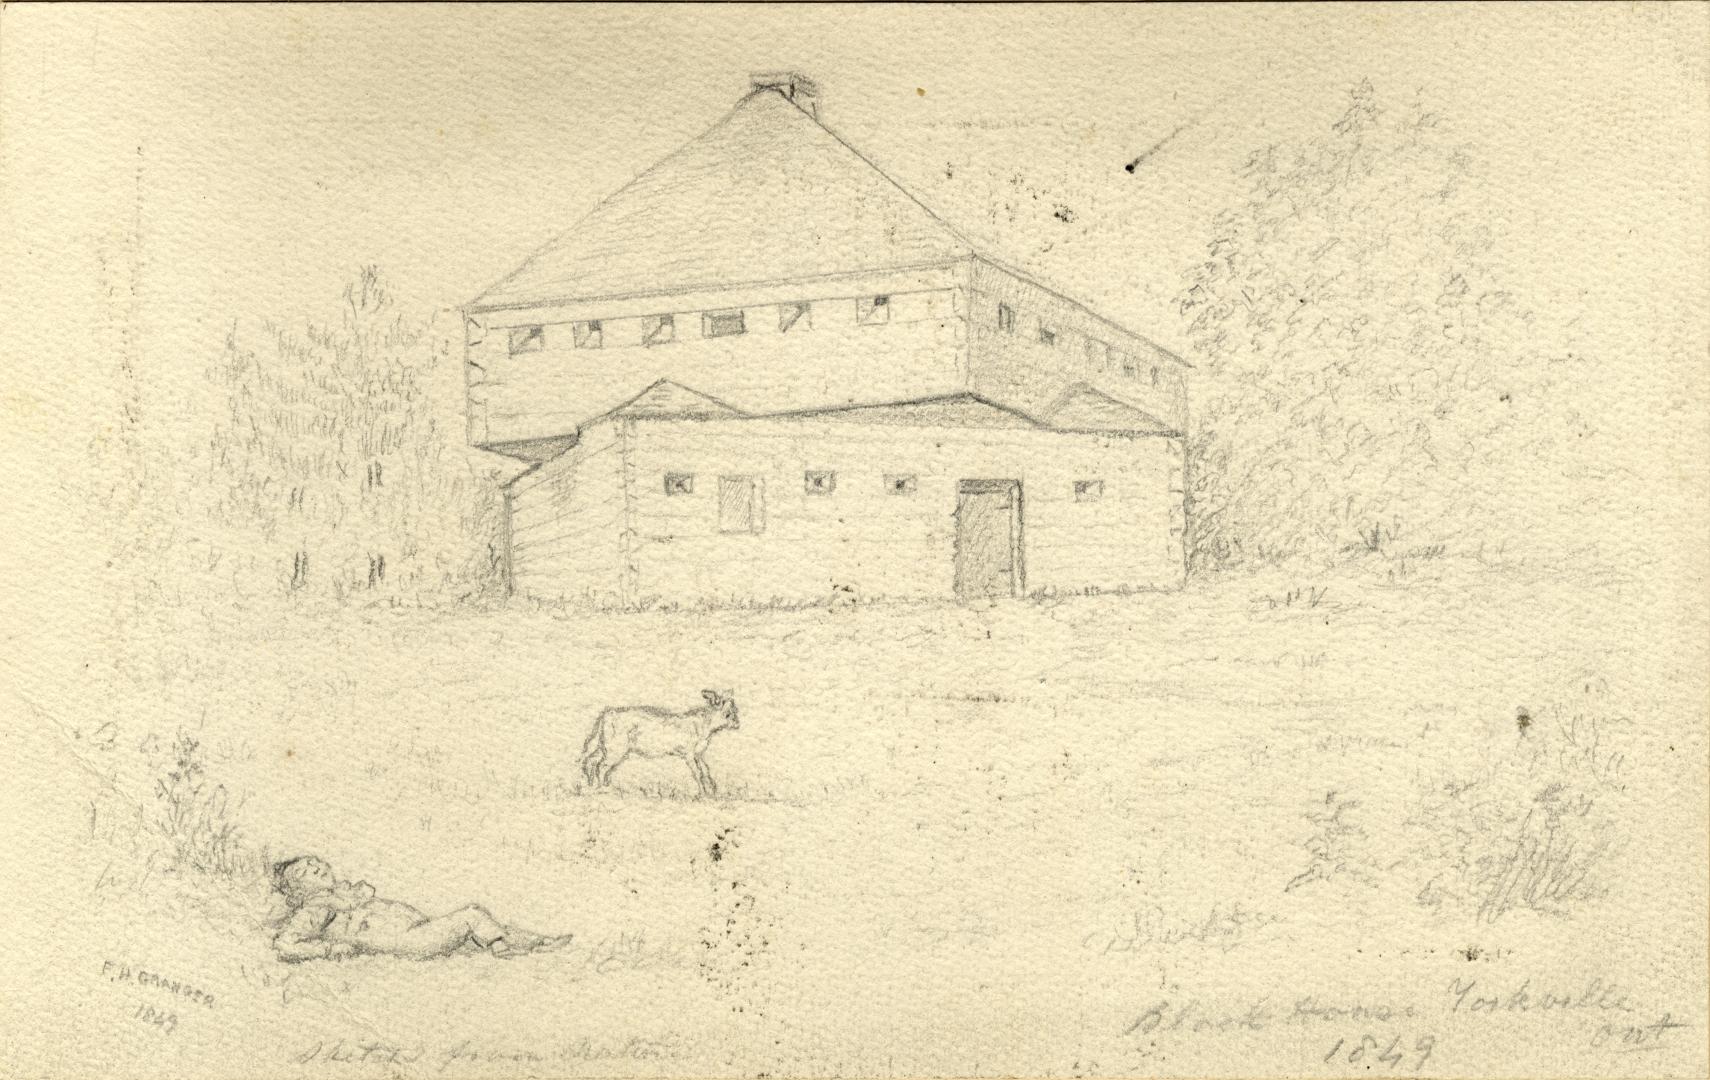 Drawing shows a military fortification.